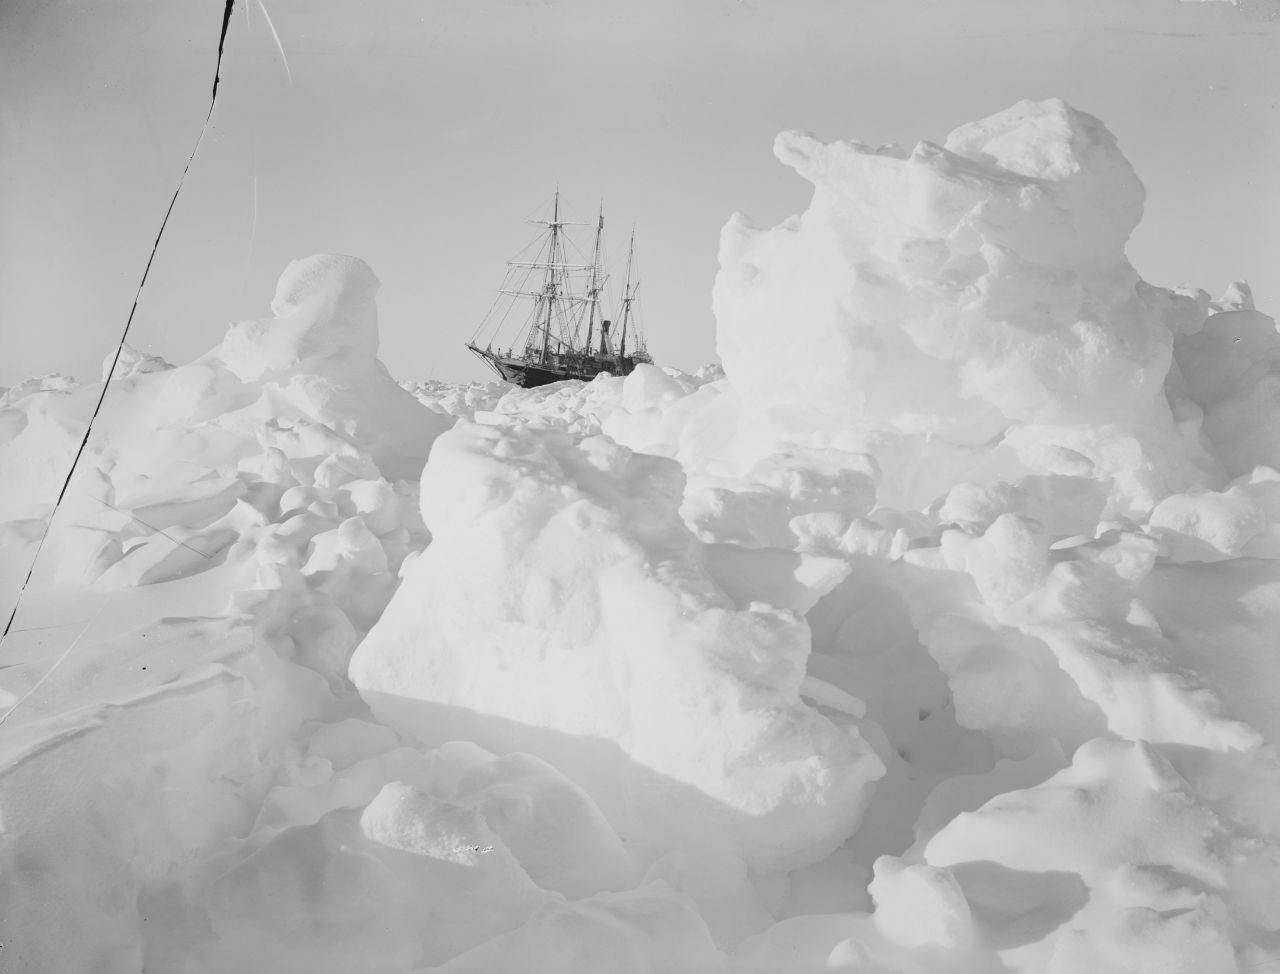 Frank Hurley's striking photos of the expedition have helped strengthen its legendary status.